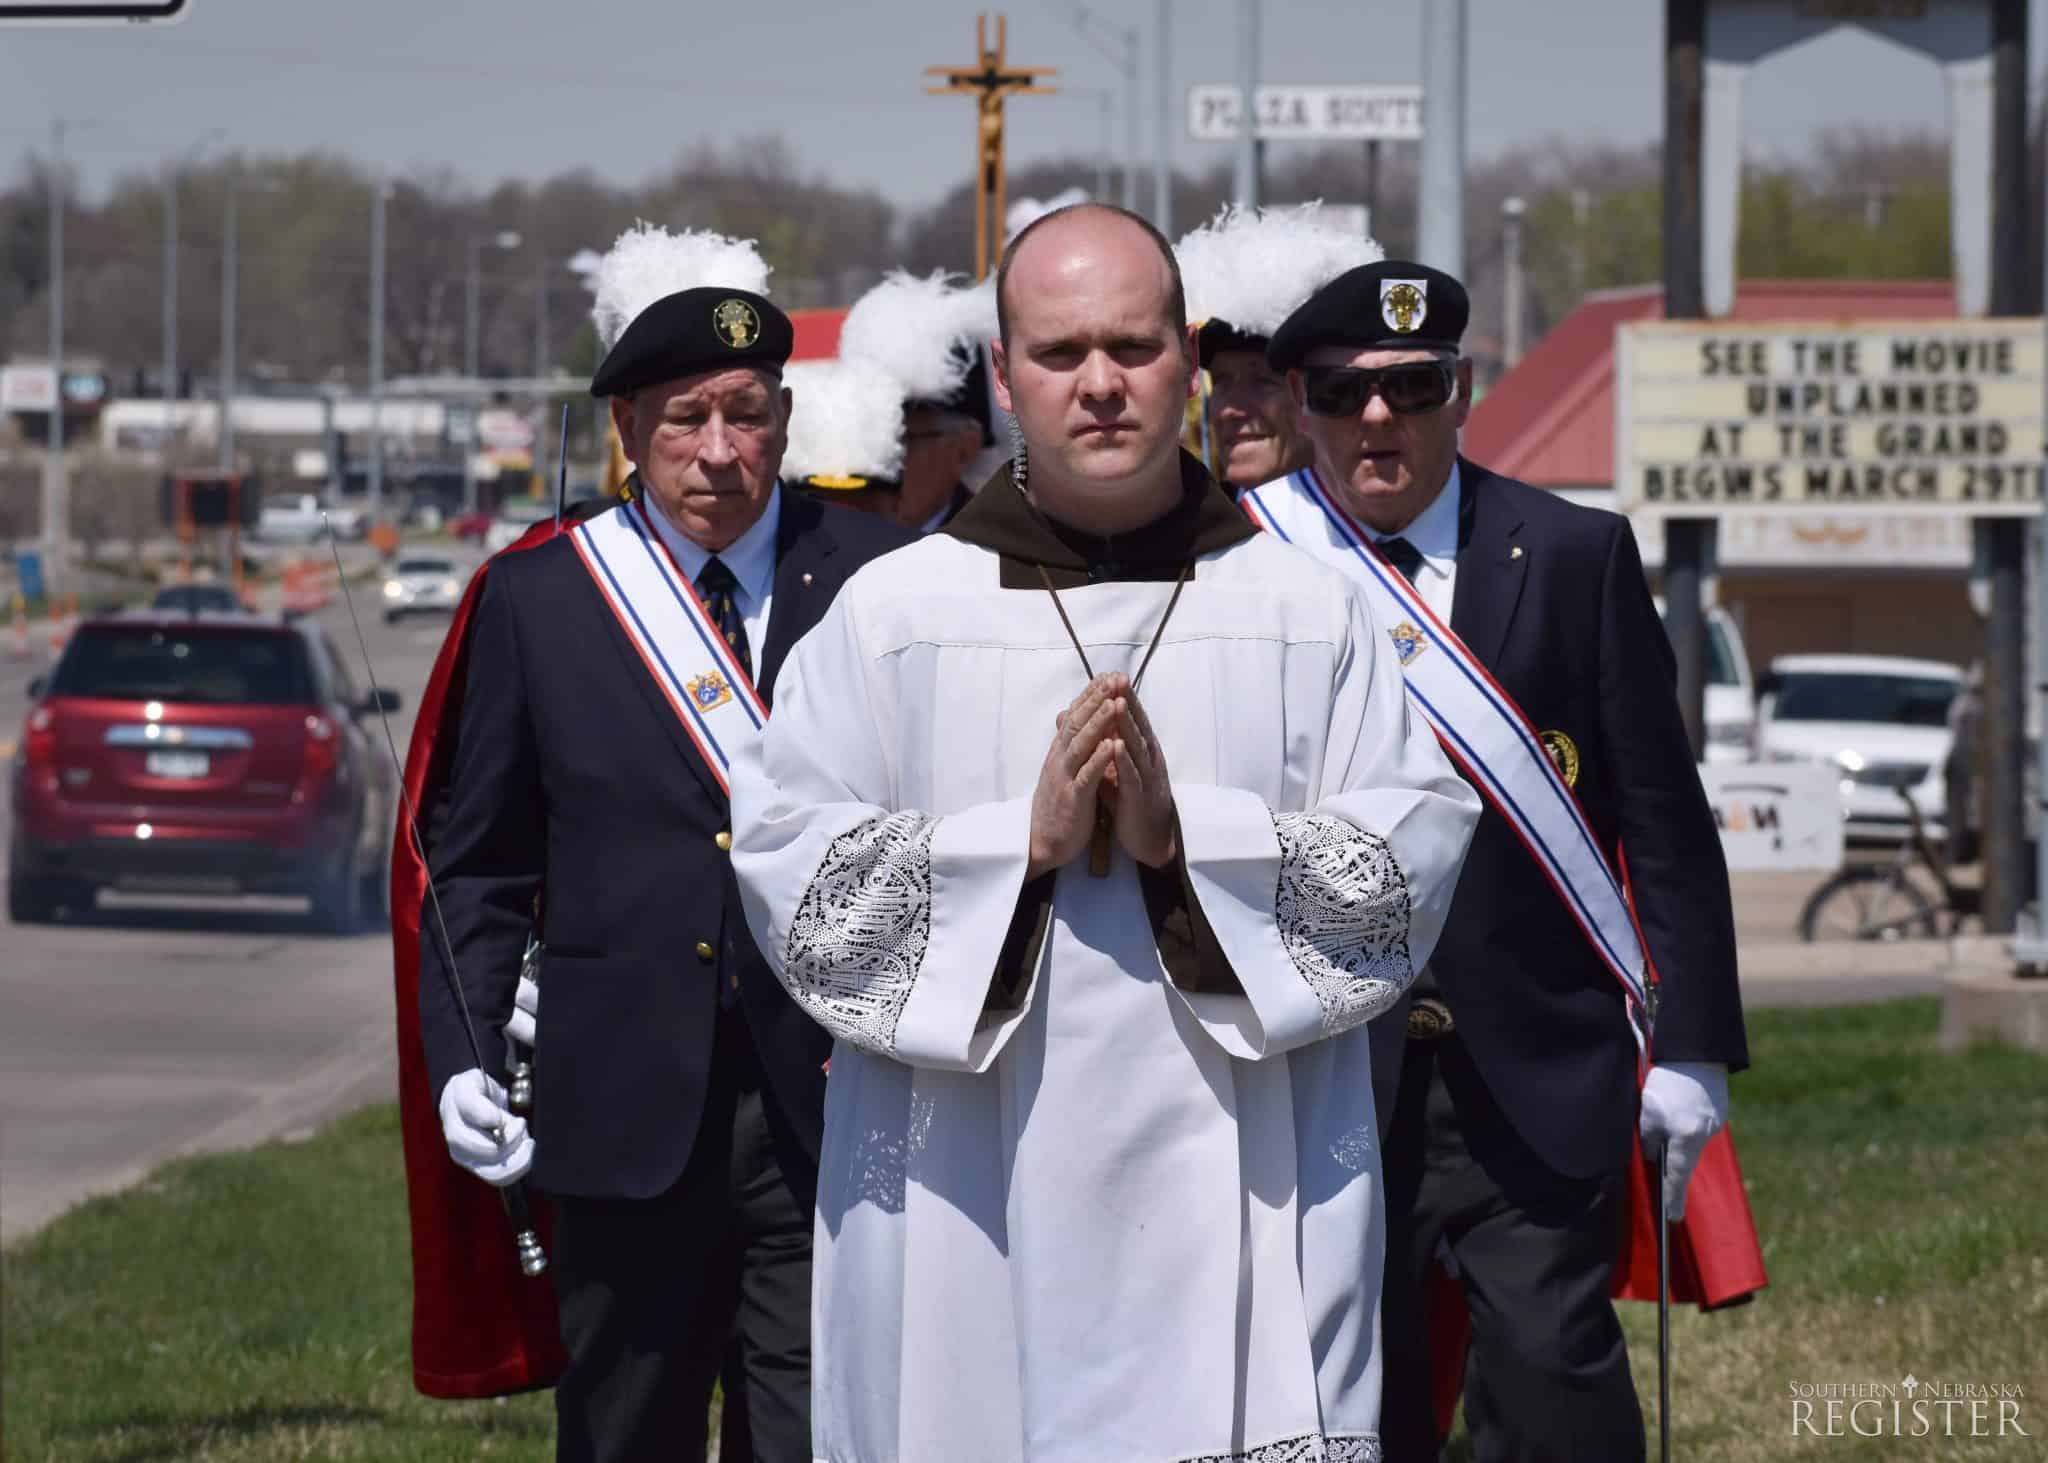 Br. Michael and Knights of Columbus in the procession